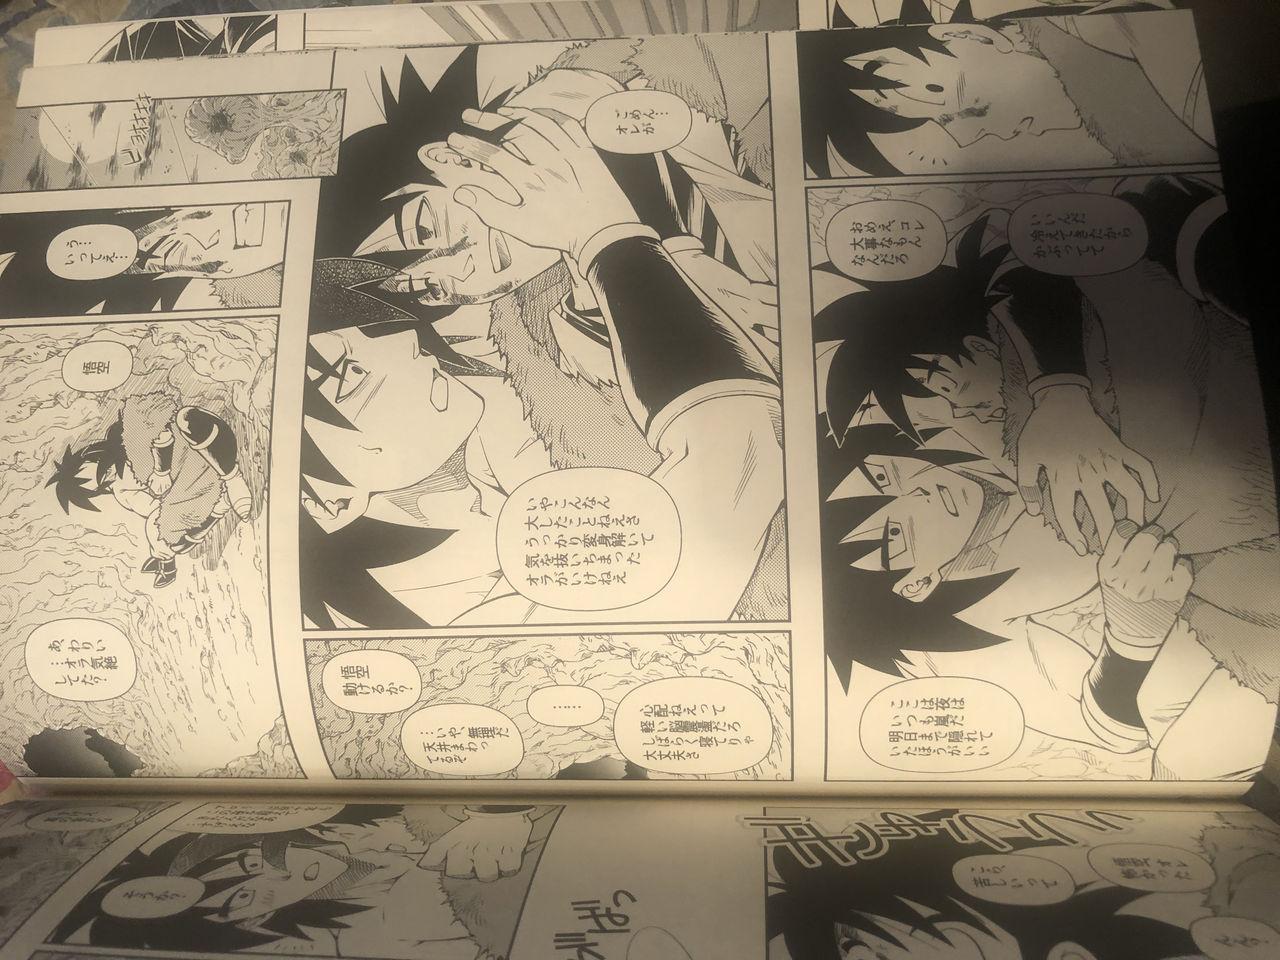 Atm Broly - Dragon ball super Groupsex - Page 5